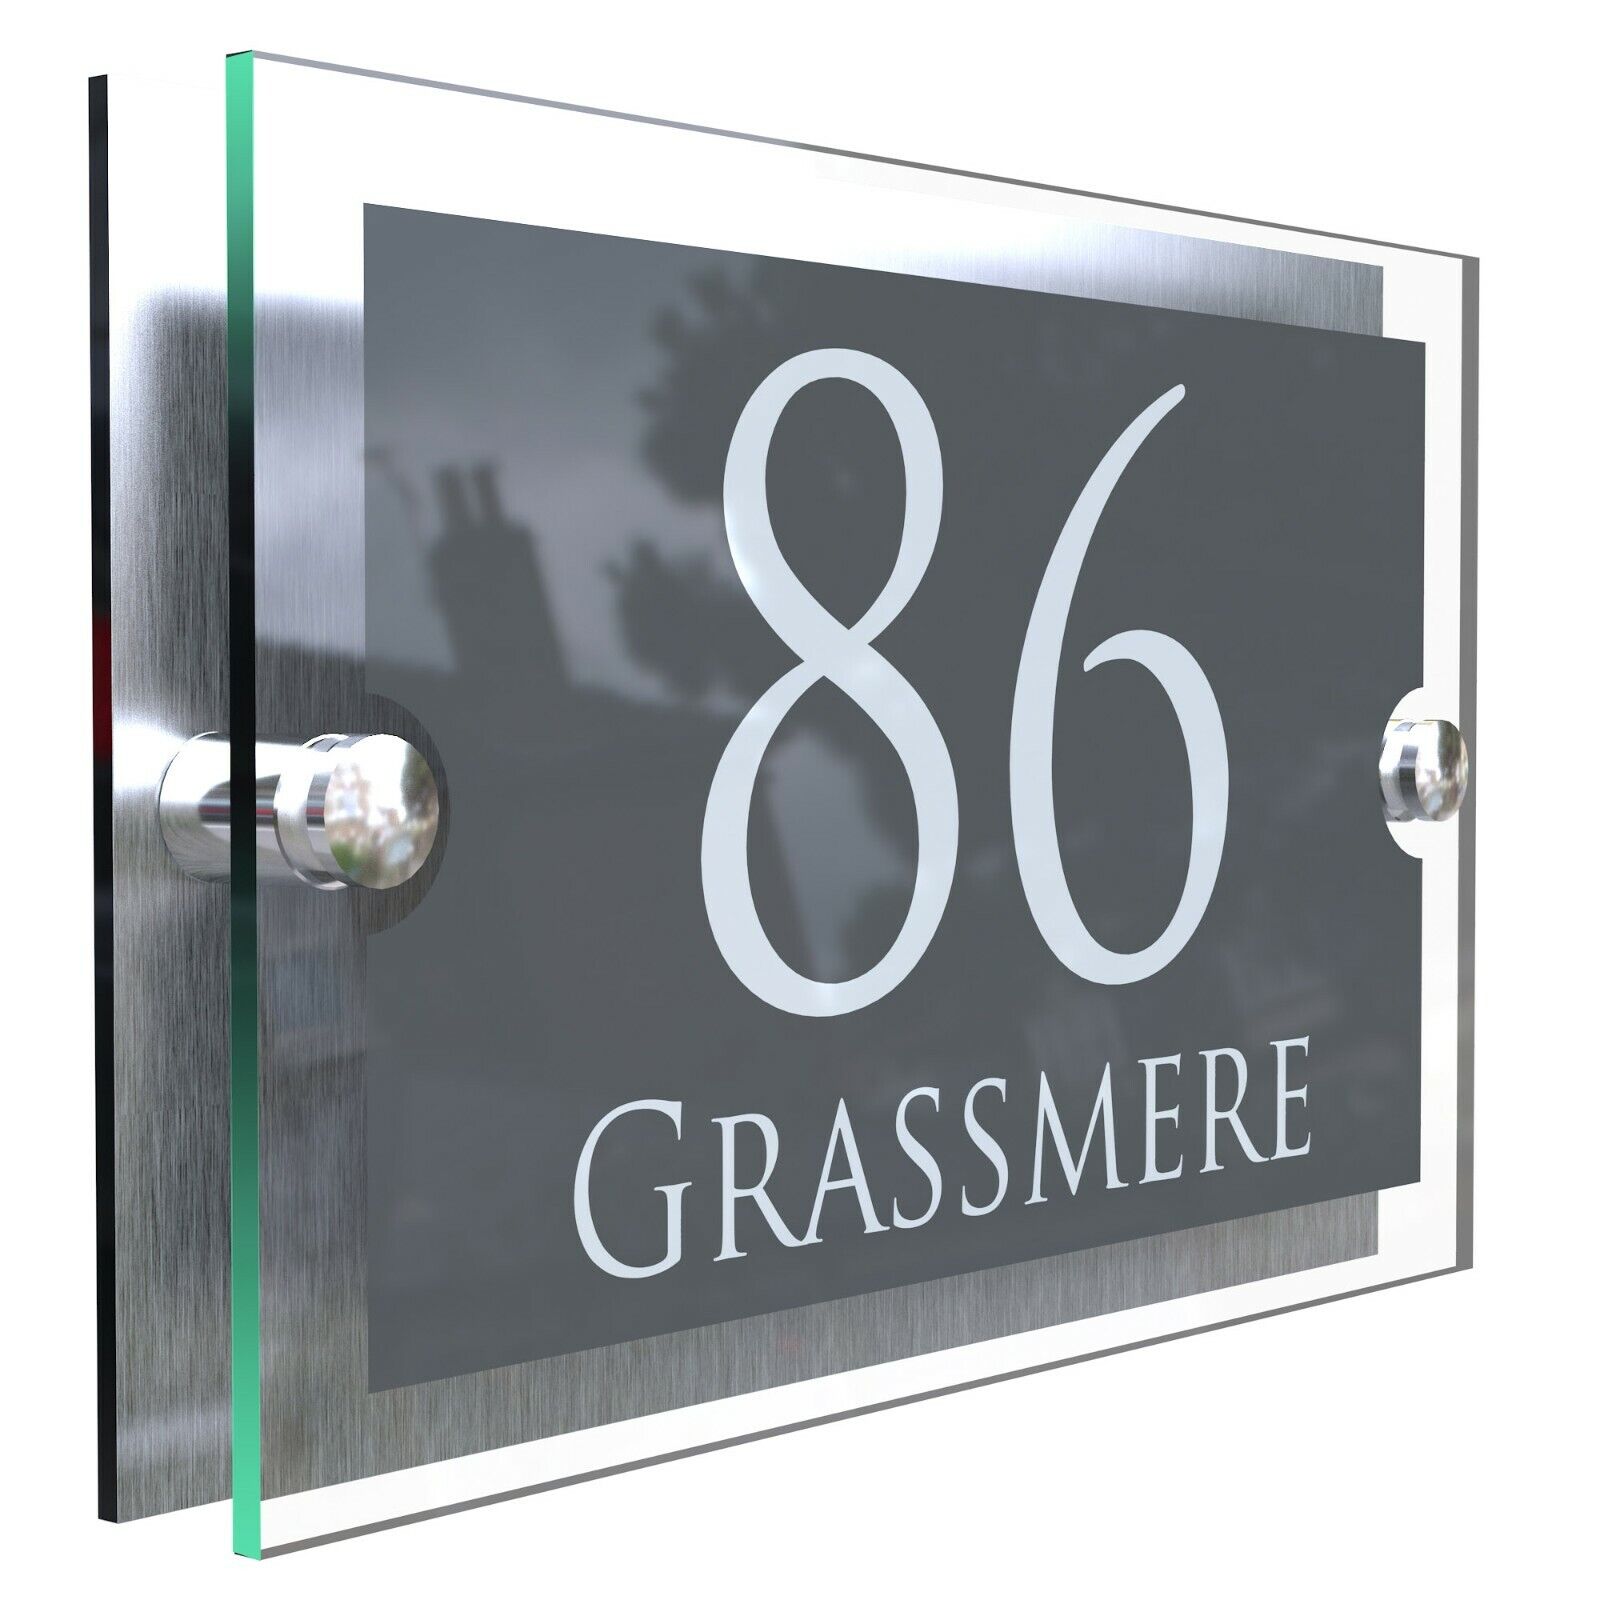 House Number Plaques Glass Effect Acrylic Signs Door Plates Name Wall Display